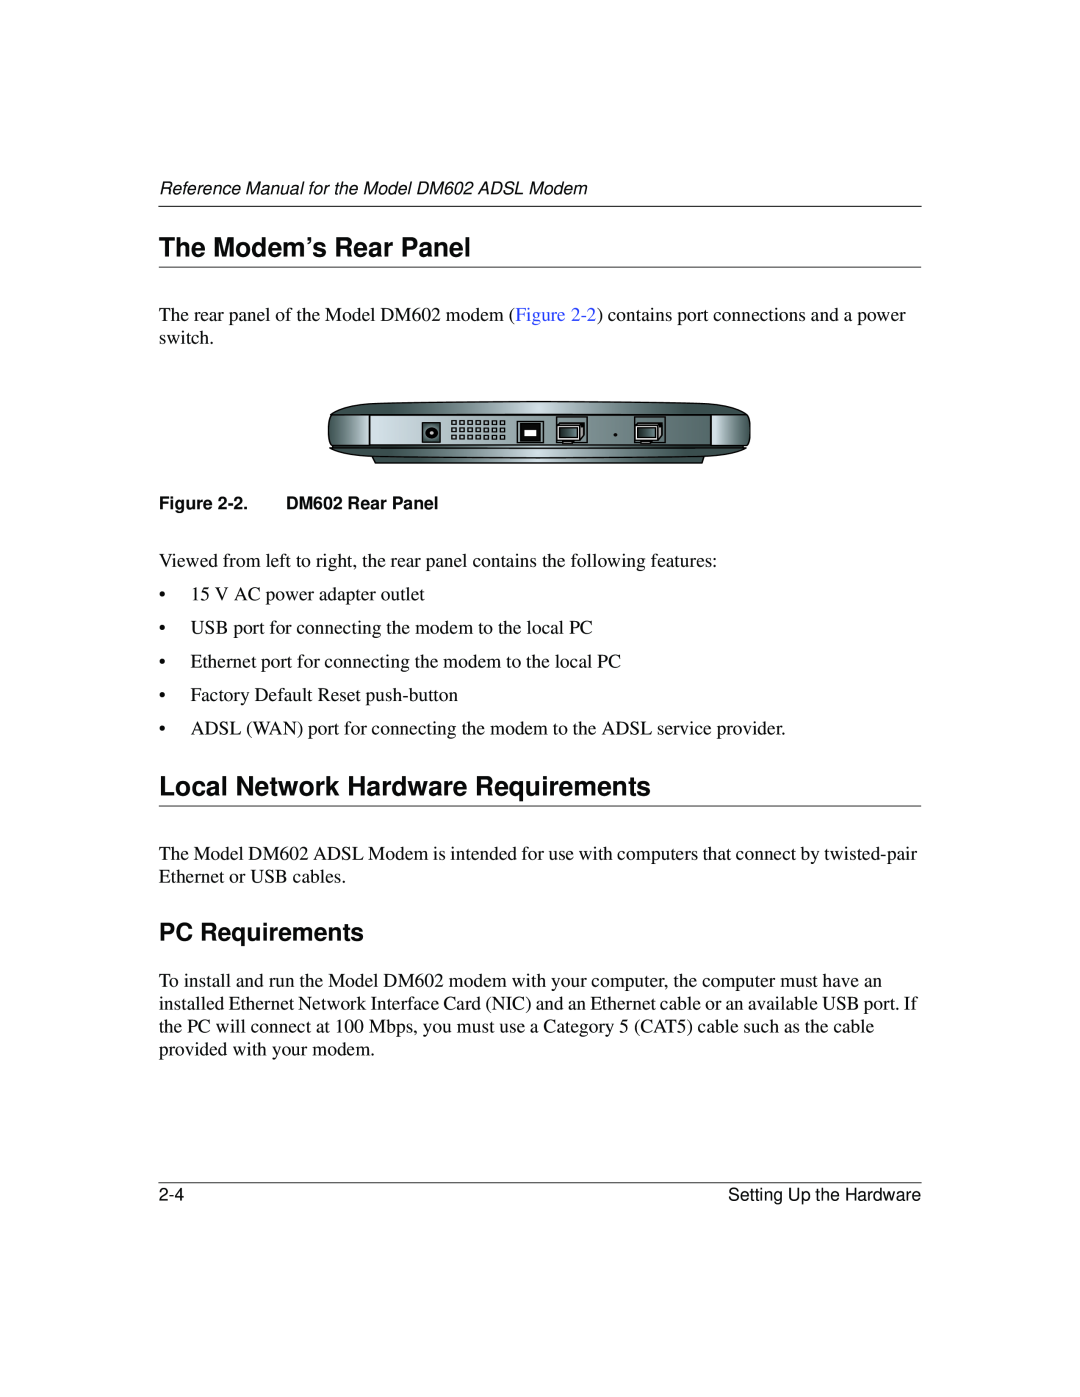 NETGEAR DM602 manual The Modem’s Rear Panel, Local Network Hardware Requirements, PC Requirements 